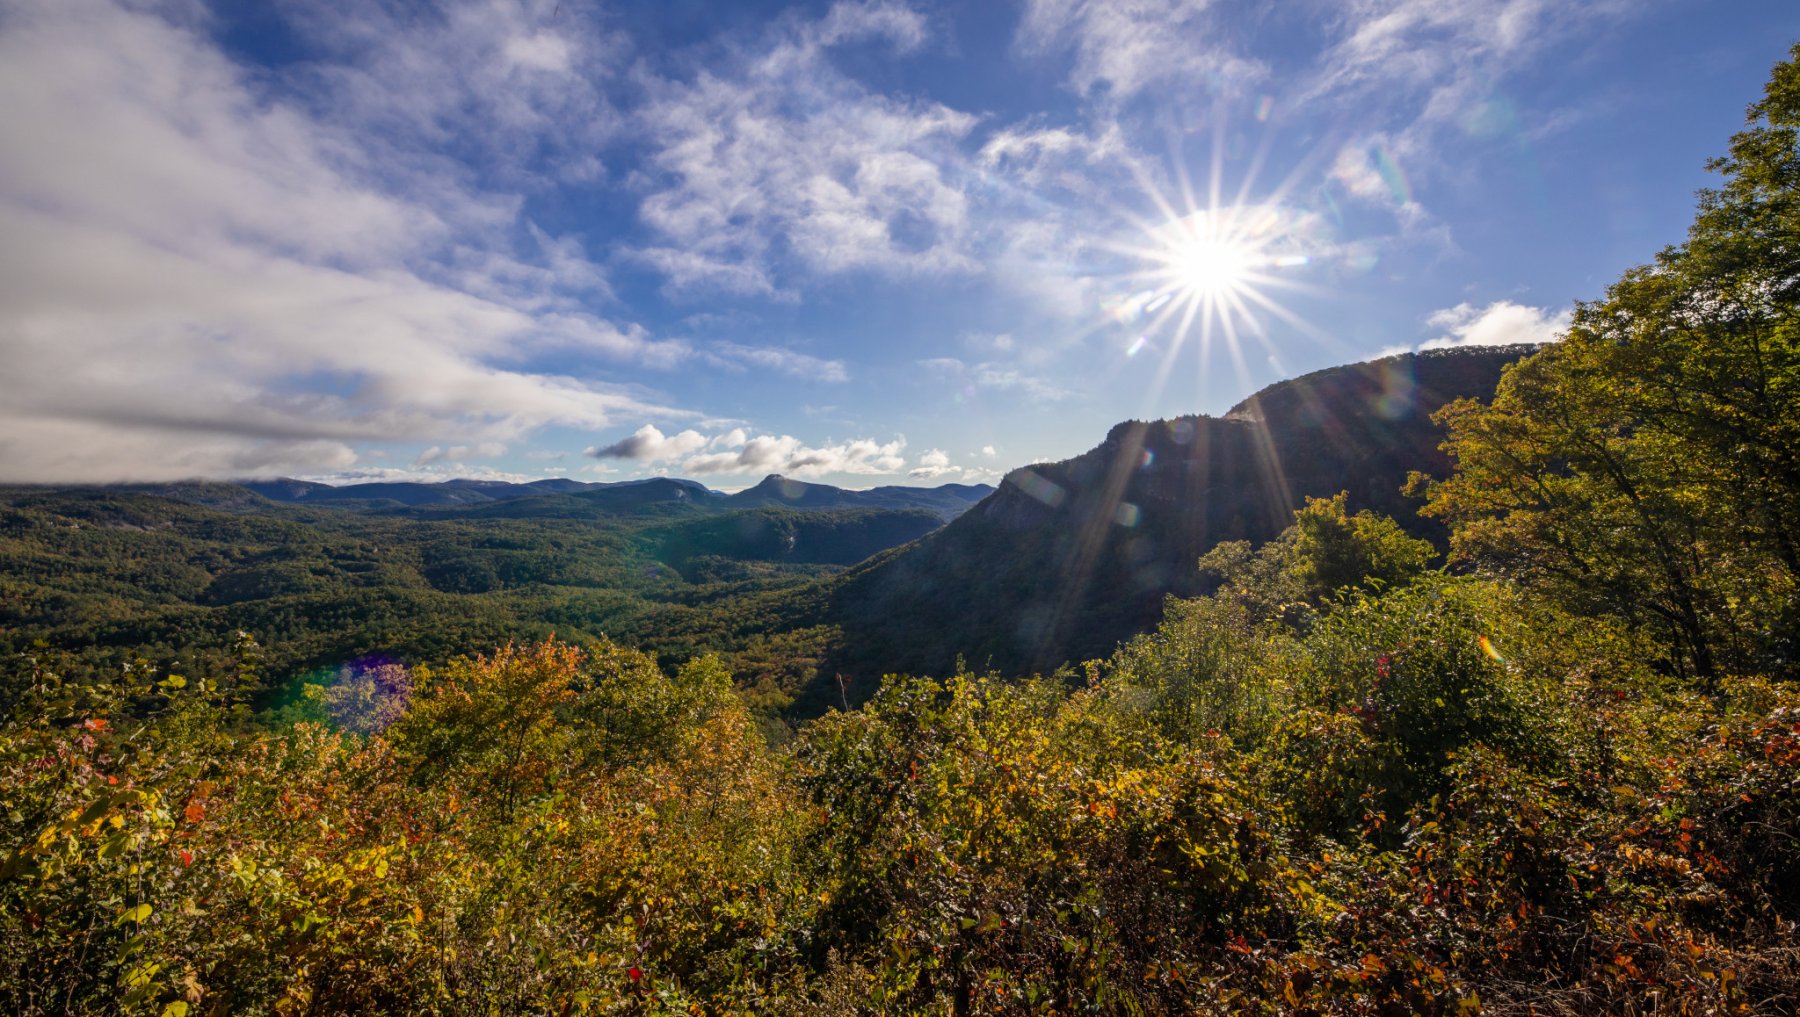 Sun shining brightly onto mountains and fall foliage